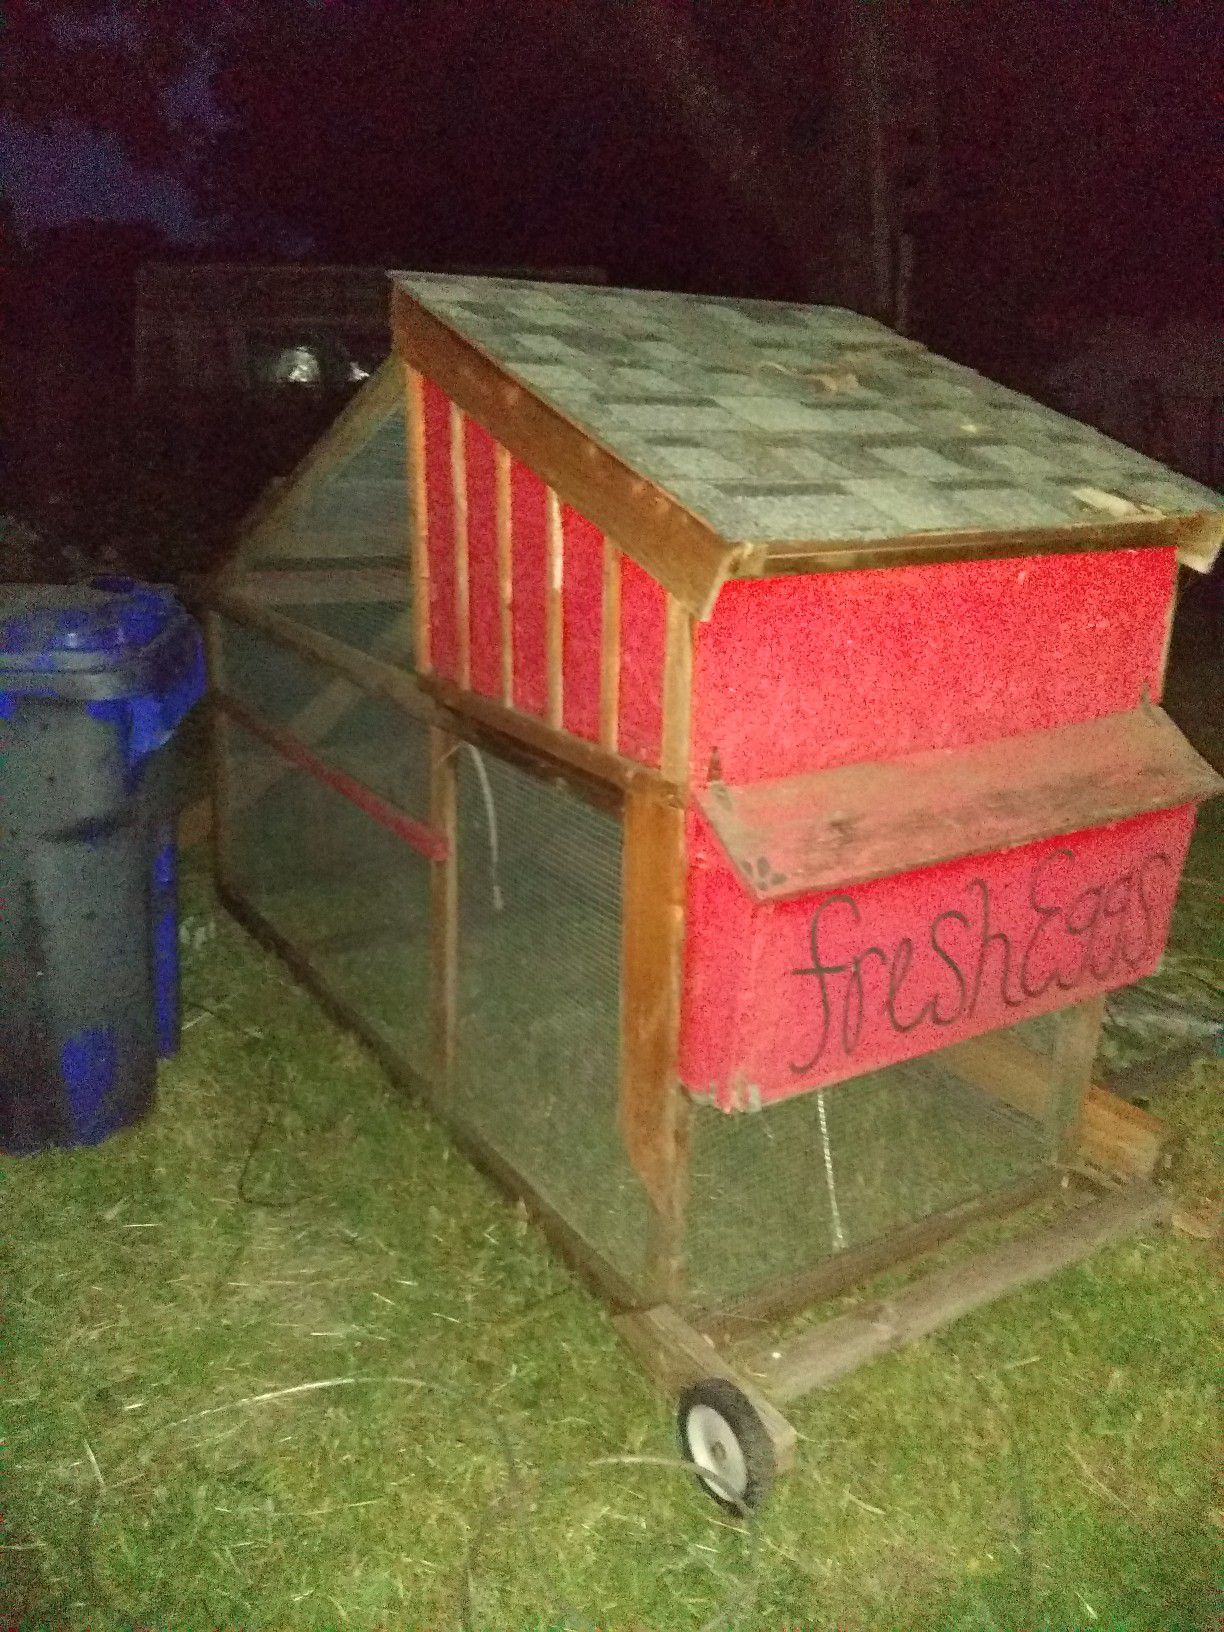 Small chicken coop